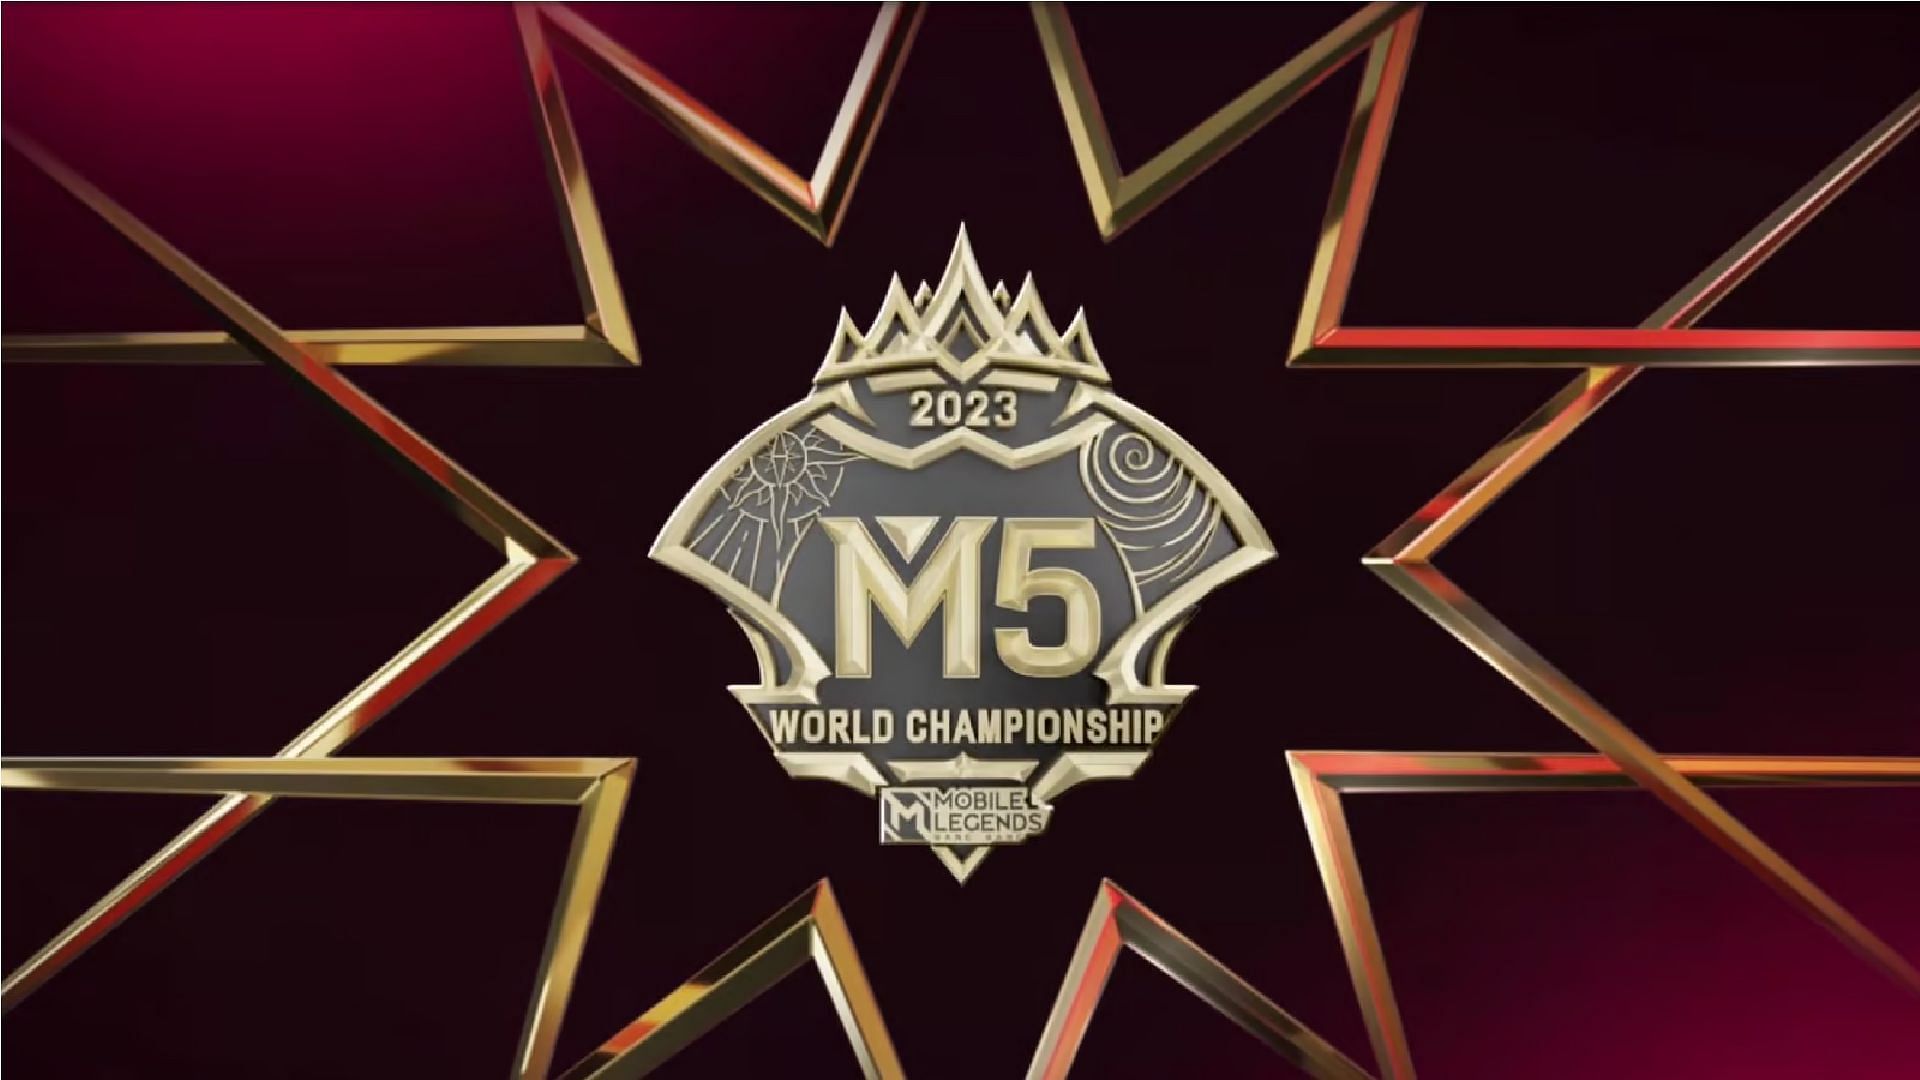 M5 World Championship will begin in November after the Mobile Legends Bang Bang patch 1.8.30 update (Image via Moonton Games)